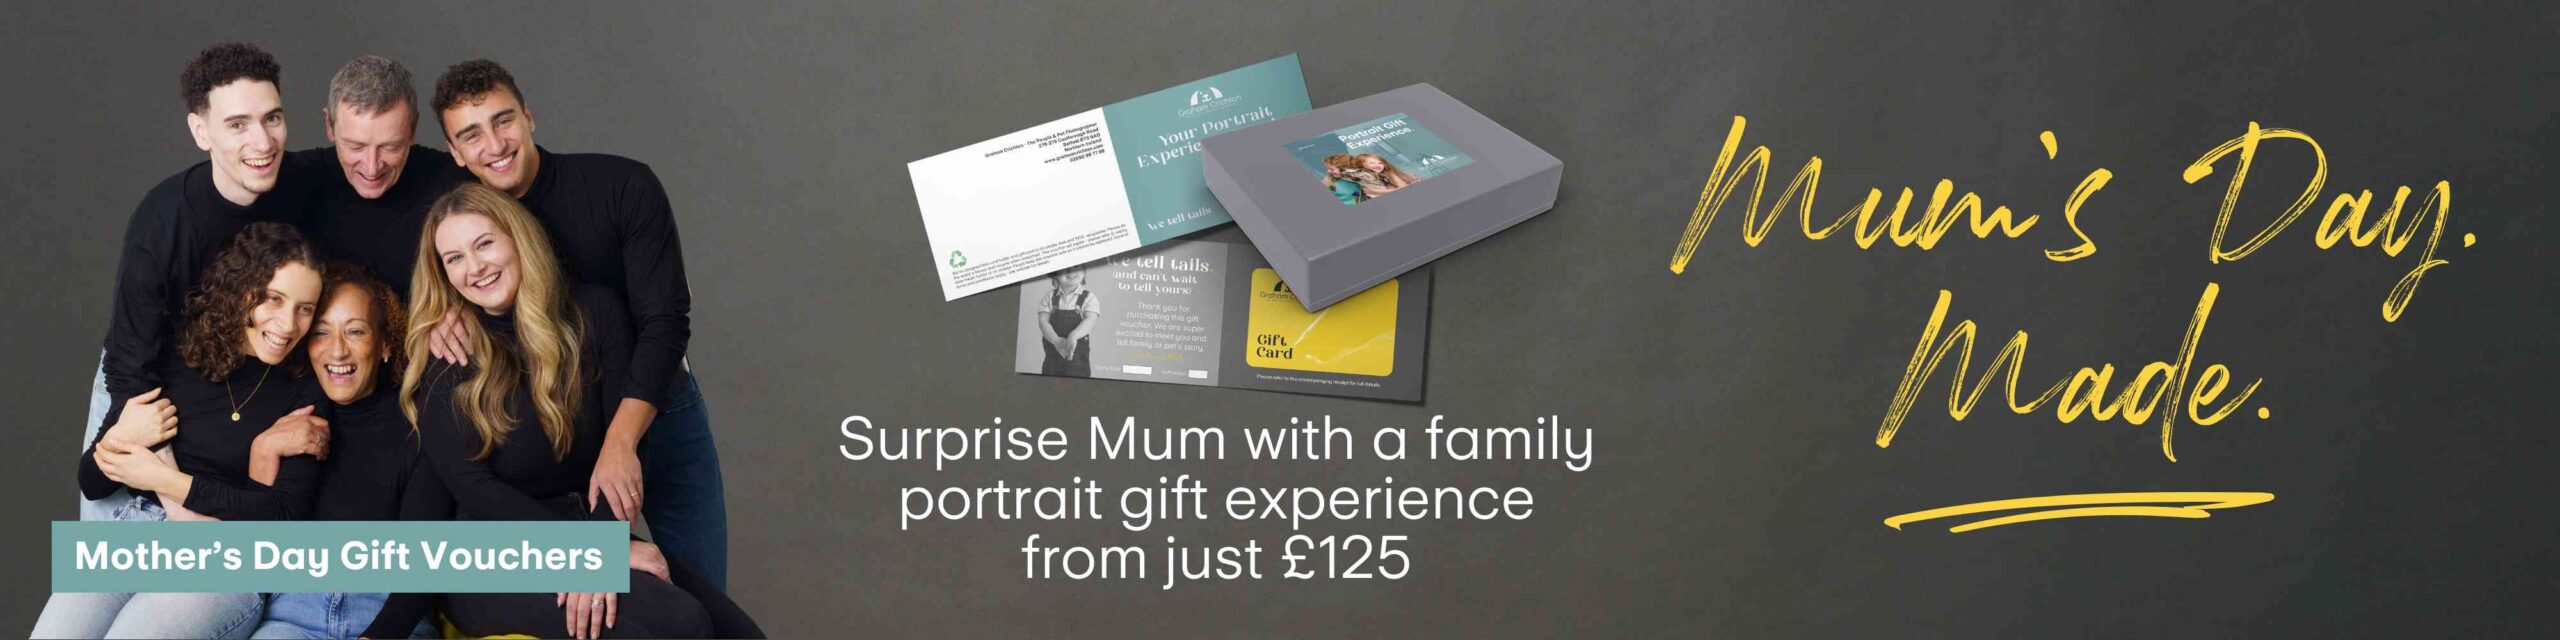 Mother's Day Gift Vouchers